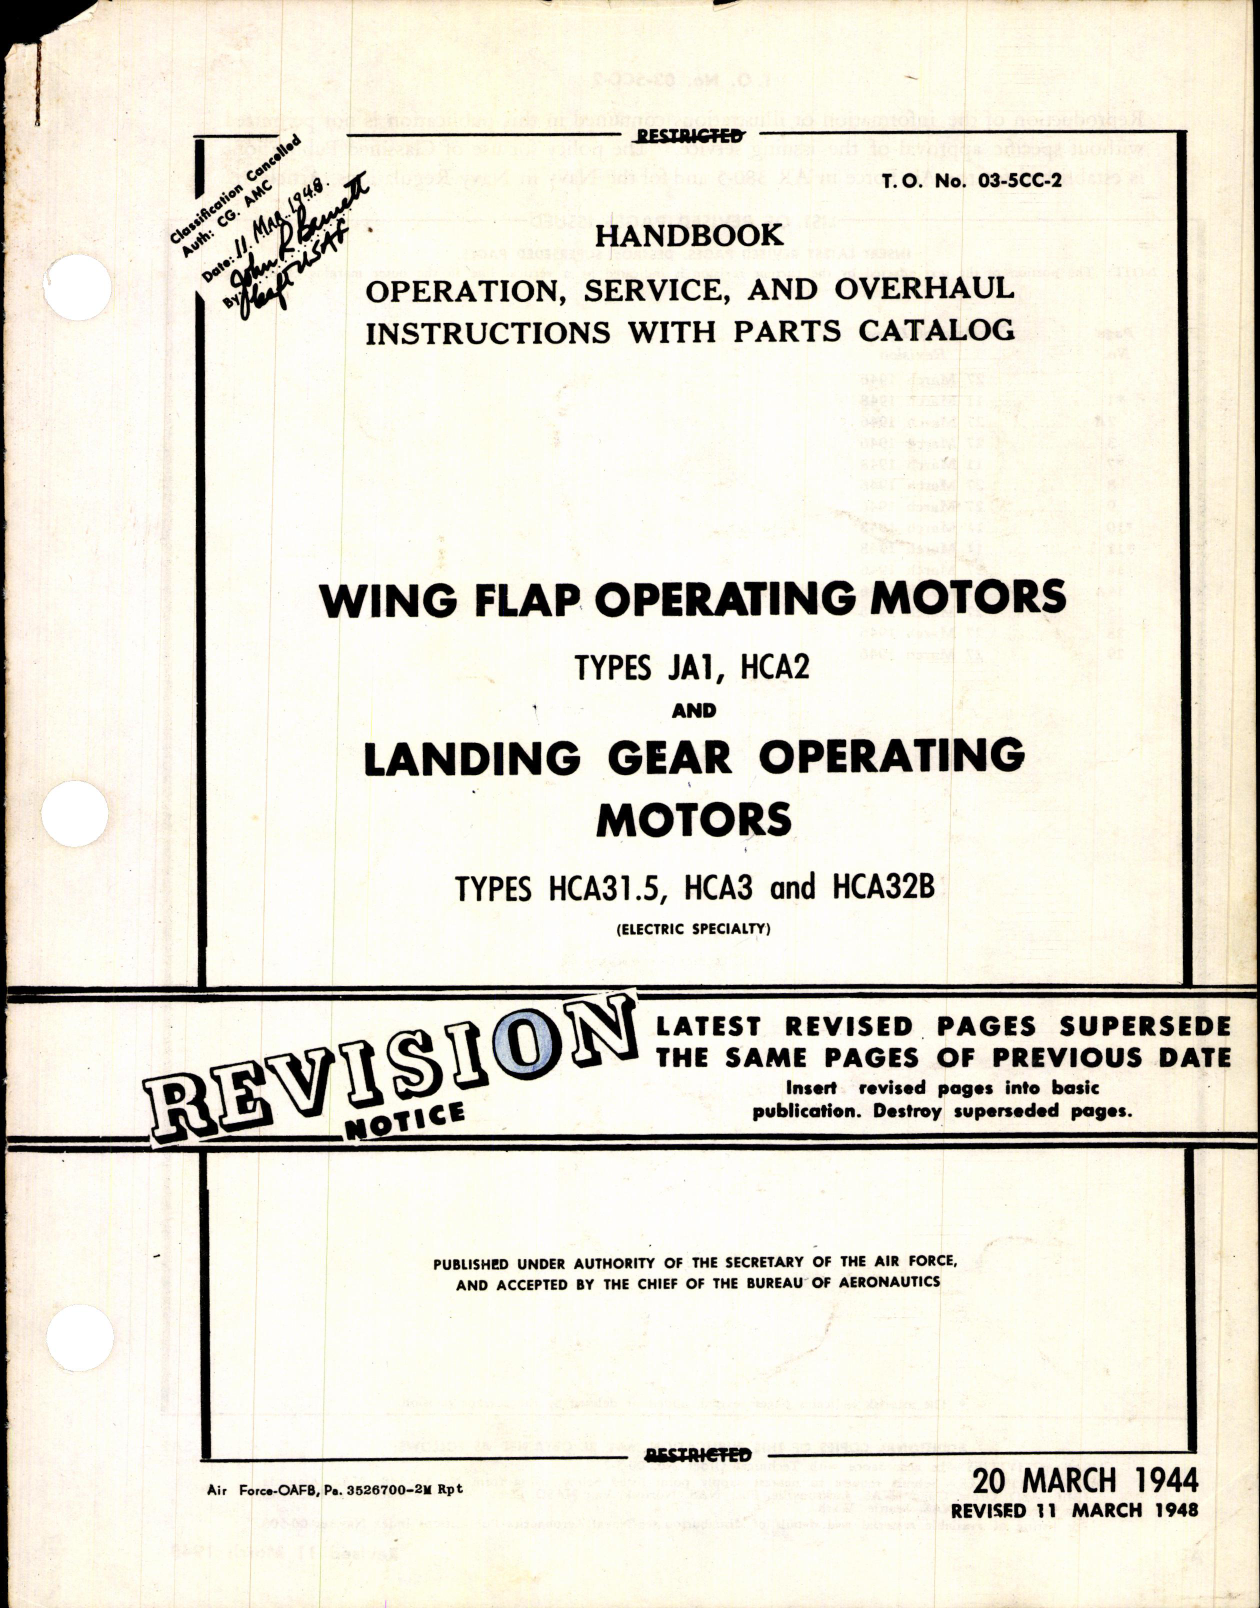 Sample page 1 from AirCorps Library document: Operation, Service, & Overhaul Inst w/ Parts Catalog for Wing Flap Operating Motors, & Landing Gear Motors